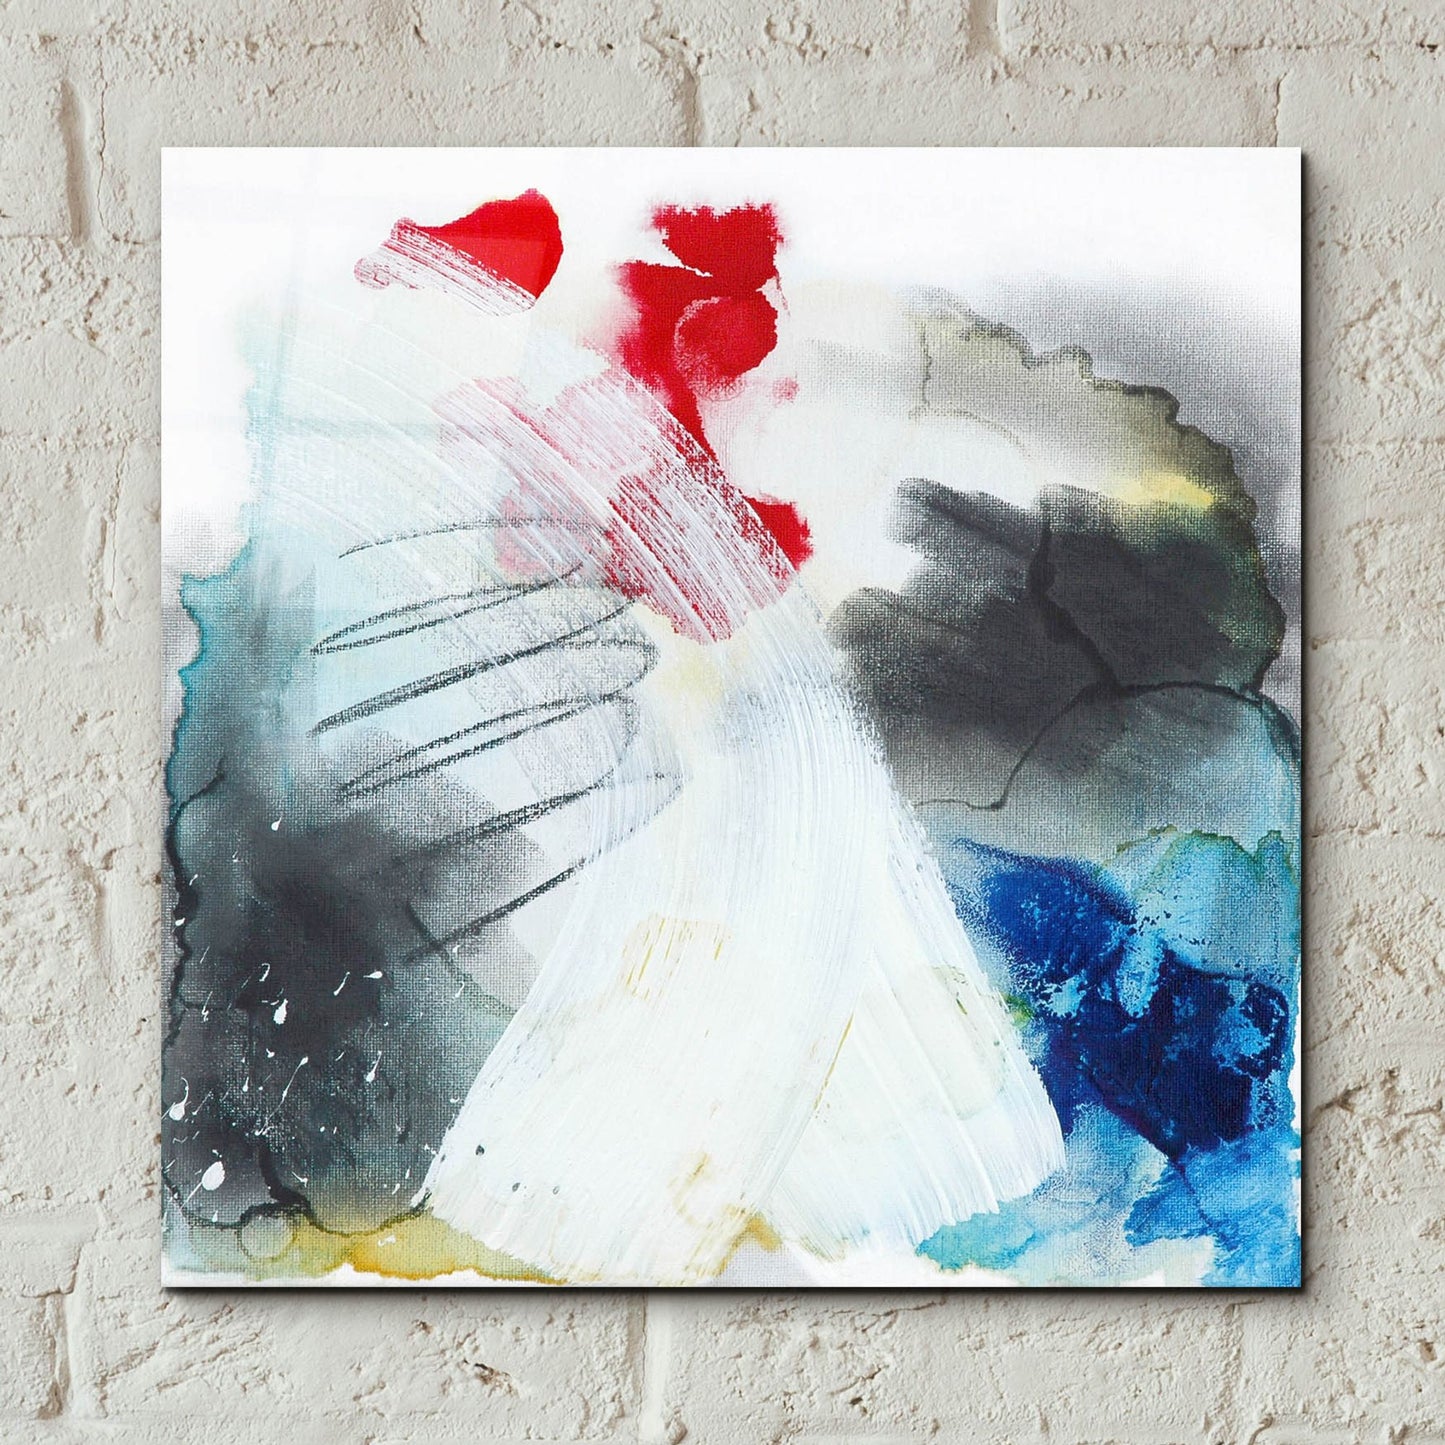 Epic Art ' Windswept' by Valerie Russell, Acrylic Glass Wall Art,12x12